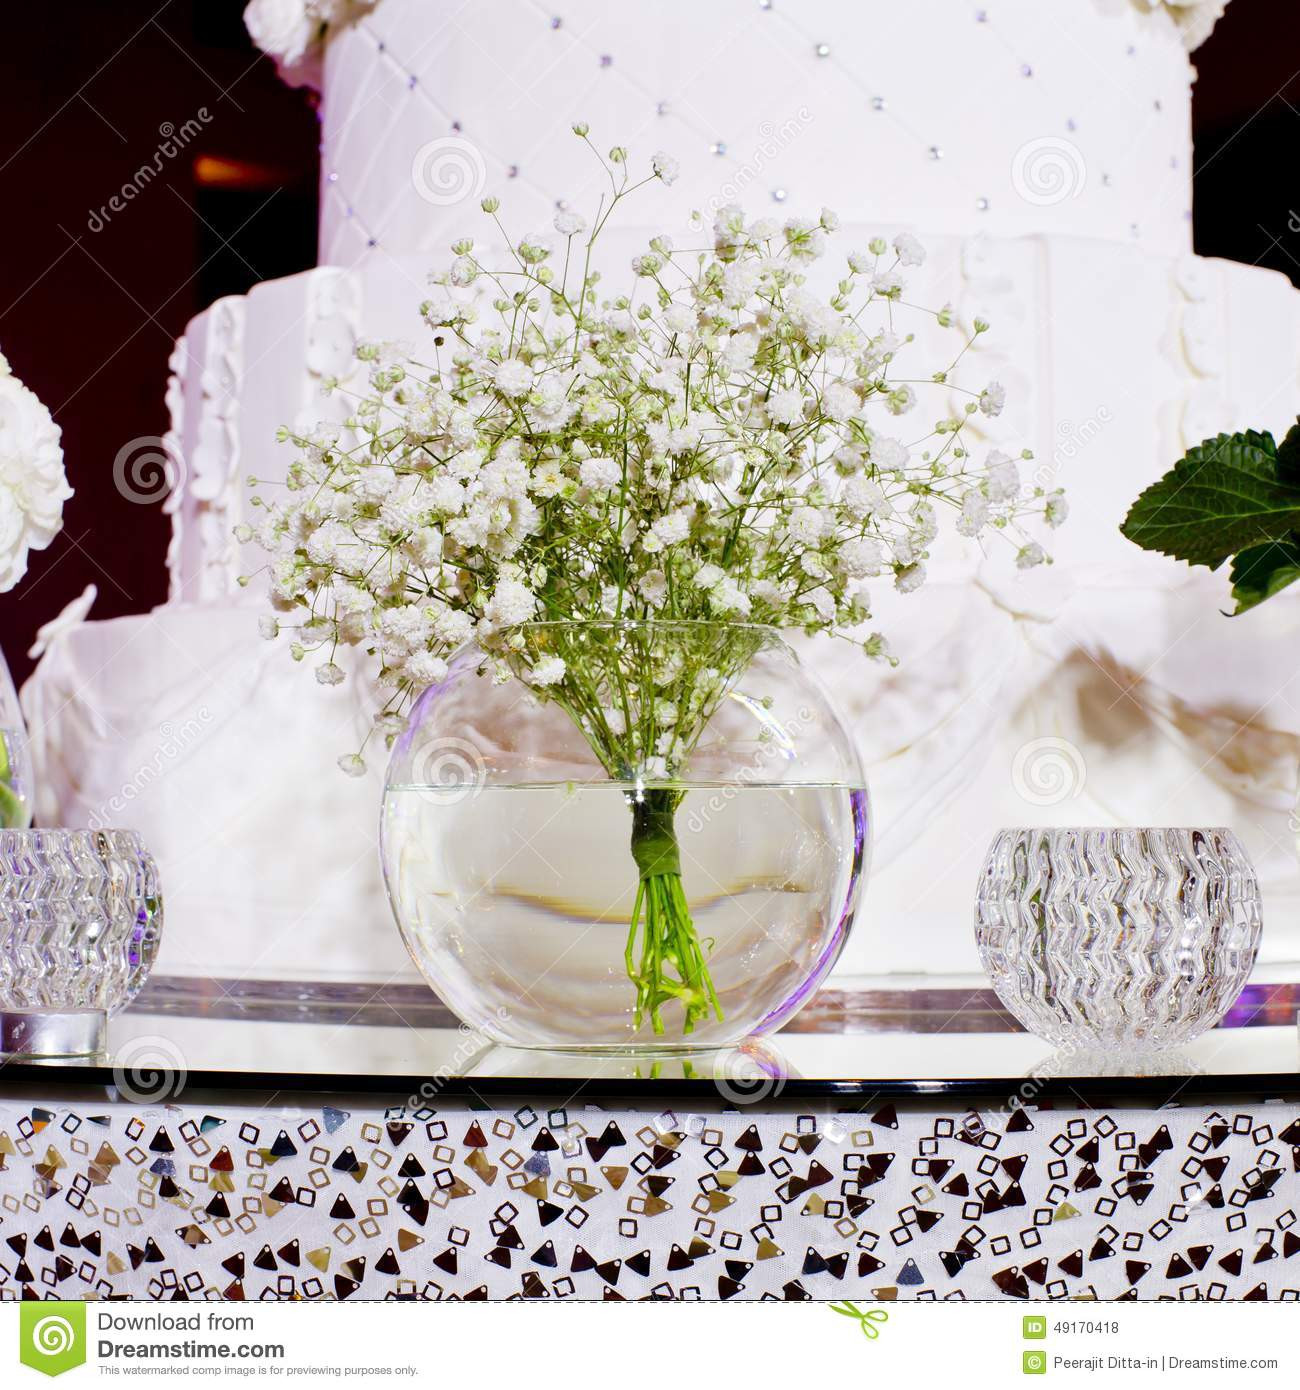 28 Perfect Glass Vase White Flowers 2024 free download glass vase white flowers of bouquet of white flowers in a glass vase stock illustration pertaining to bouquet of white flowers in a glass vase